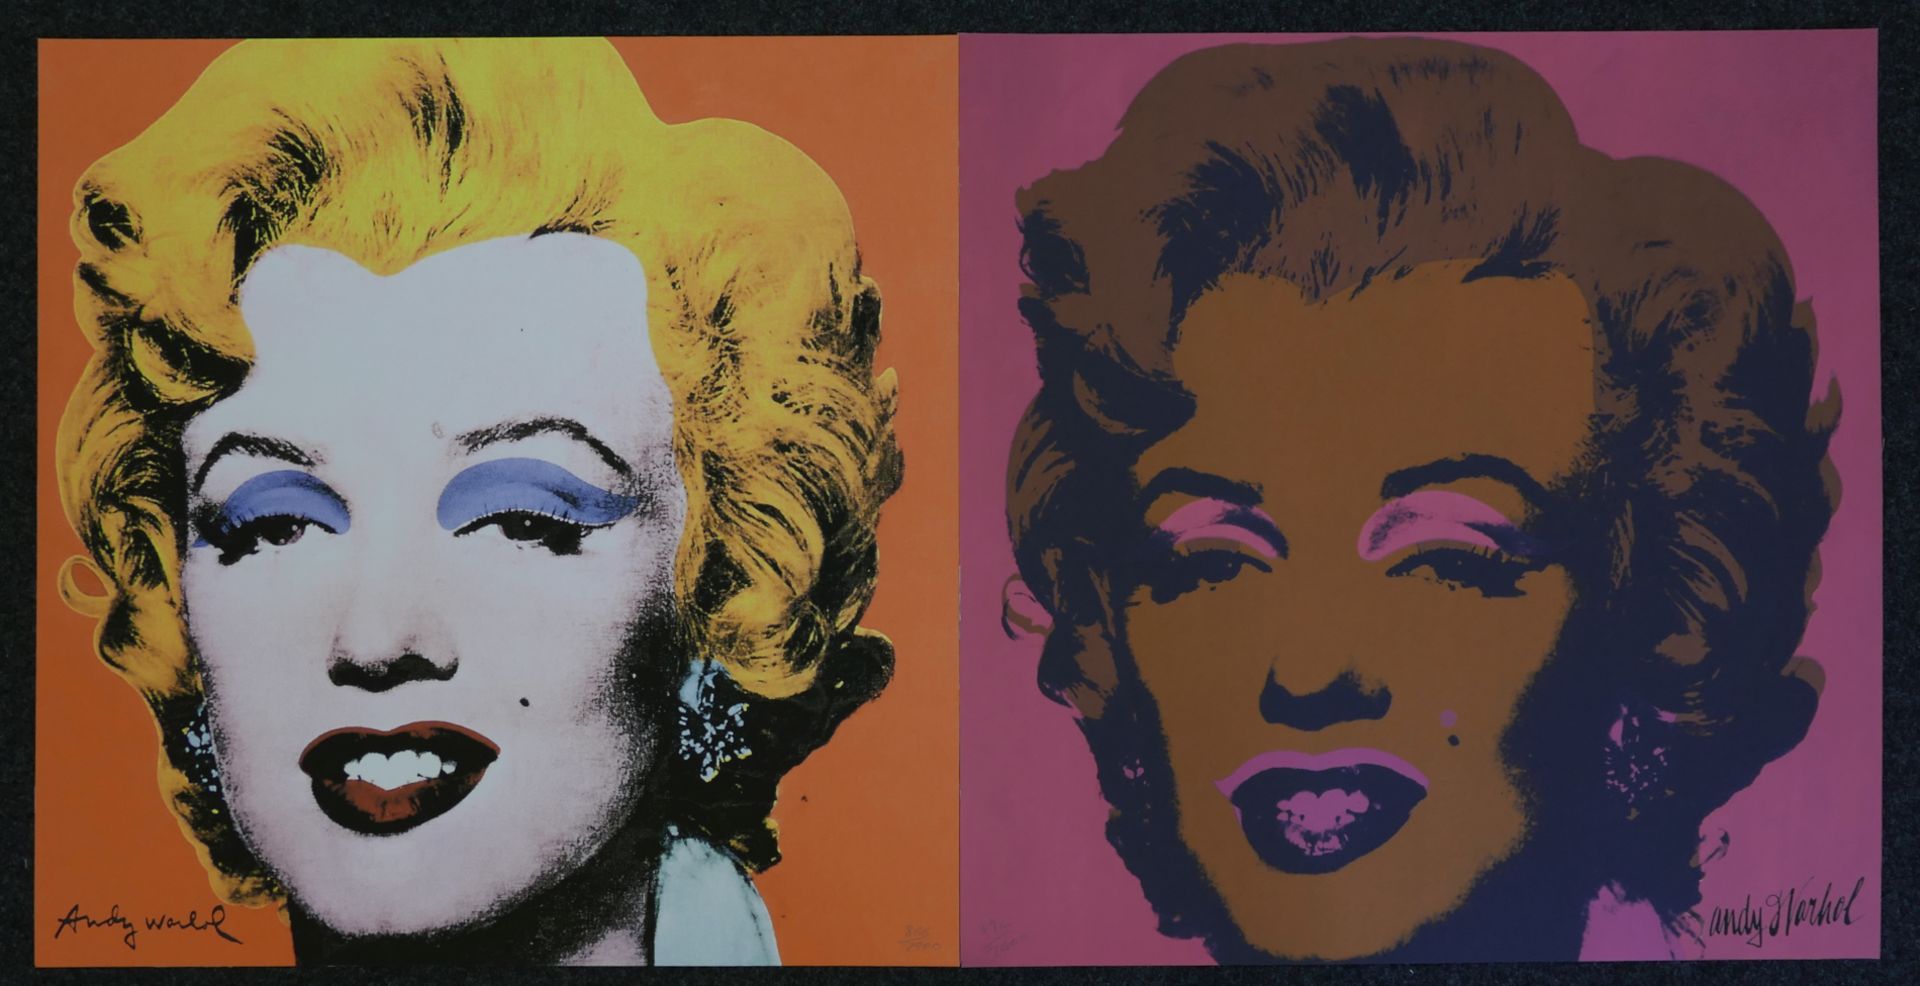 5 Offsetlithografien nach Andy WARHOL (wohl 1928 Pittsburgh-1987 New York) "Marilyn Monroe" in versc